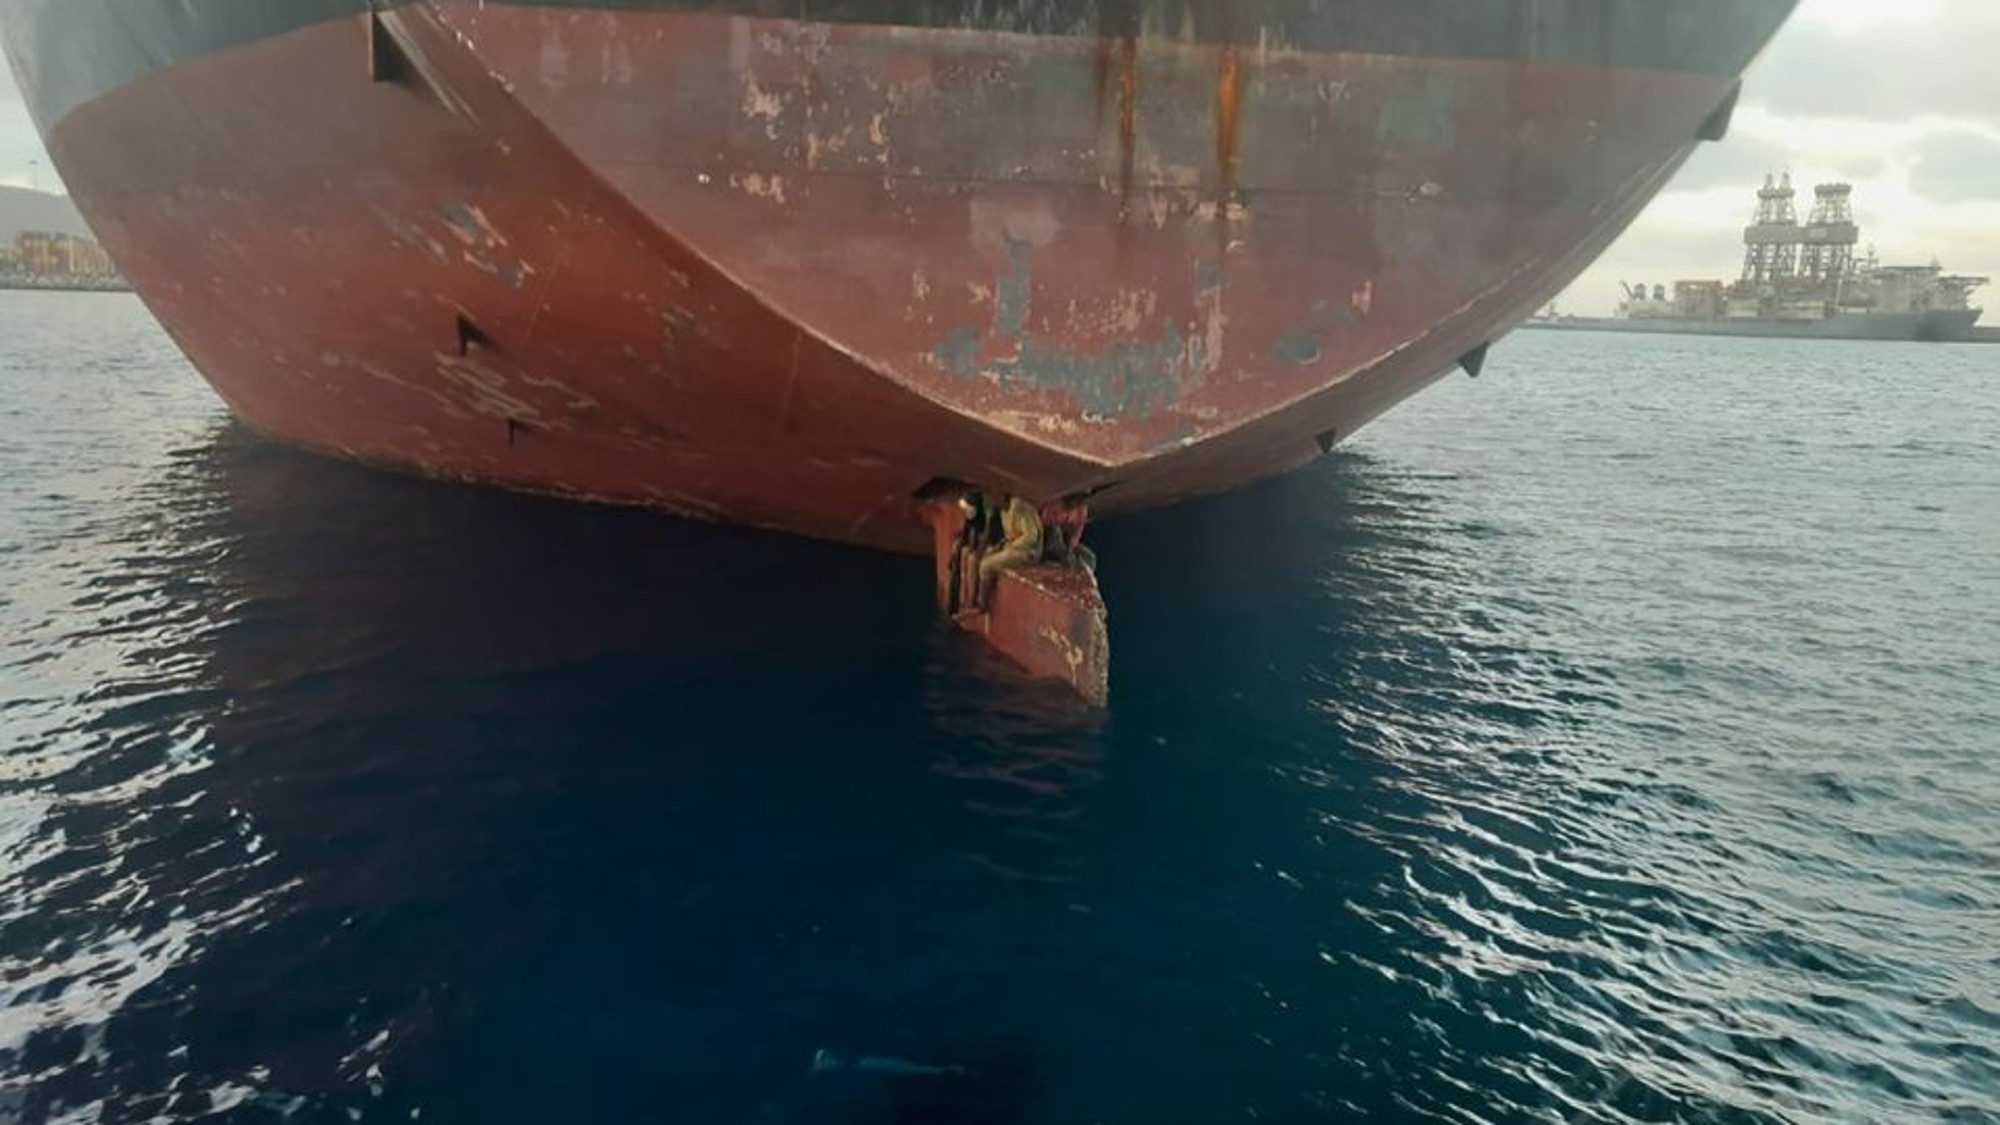 Three migrants survive 11 days on the rudder of a ship